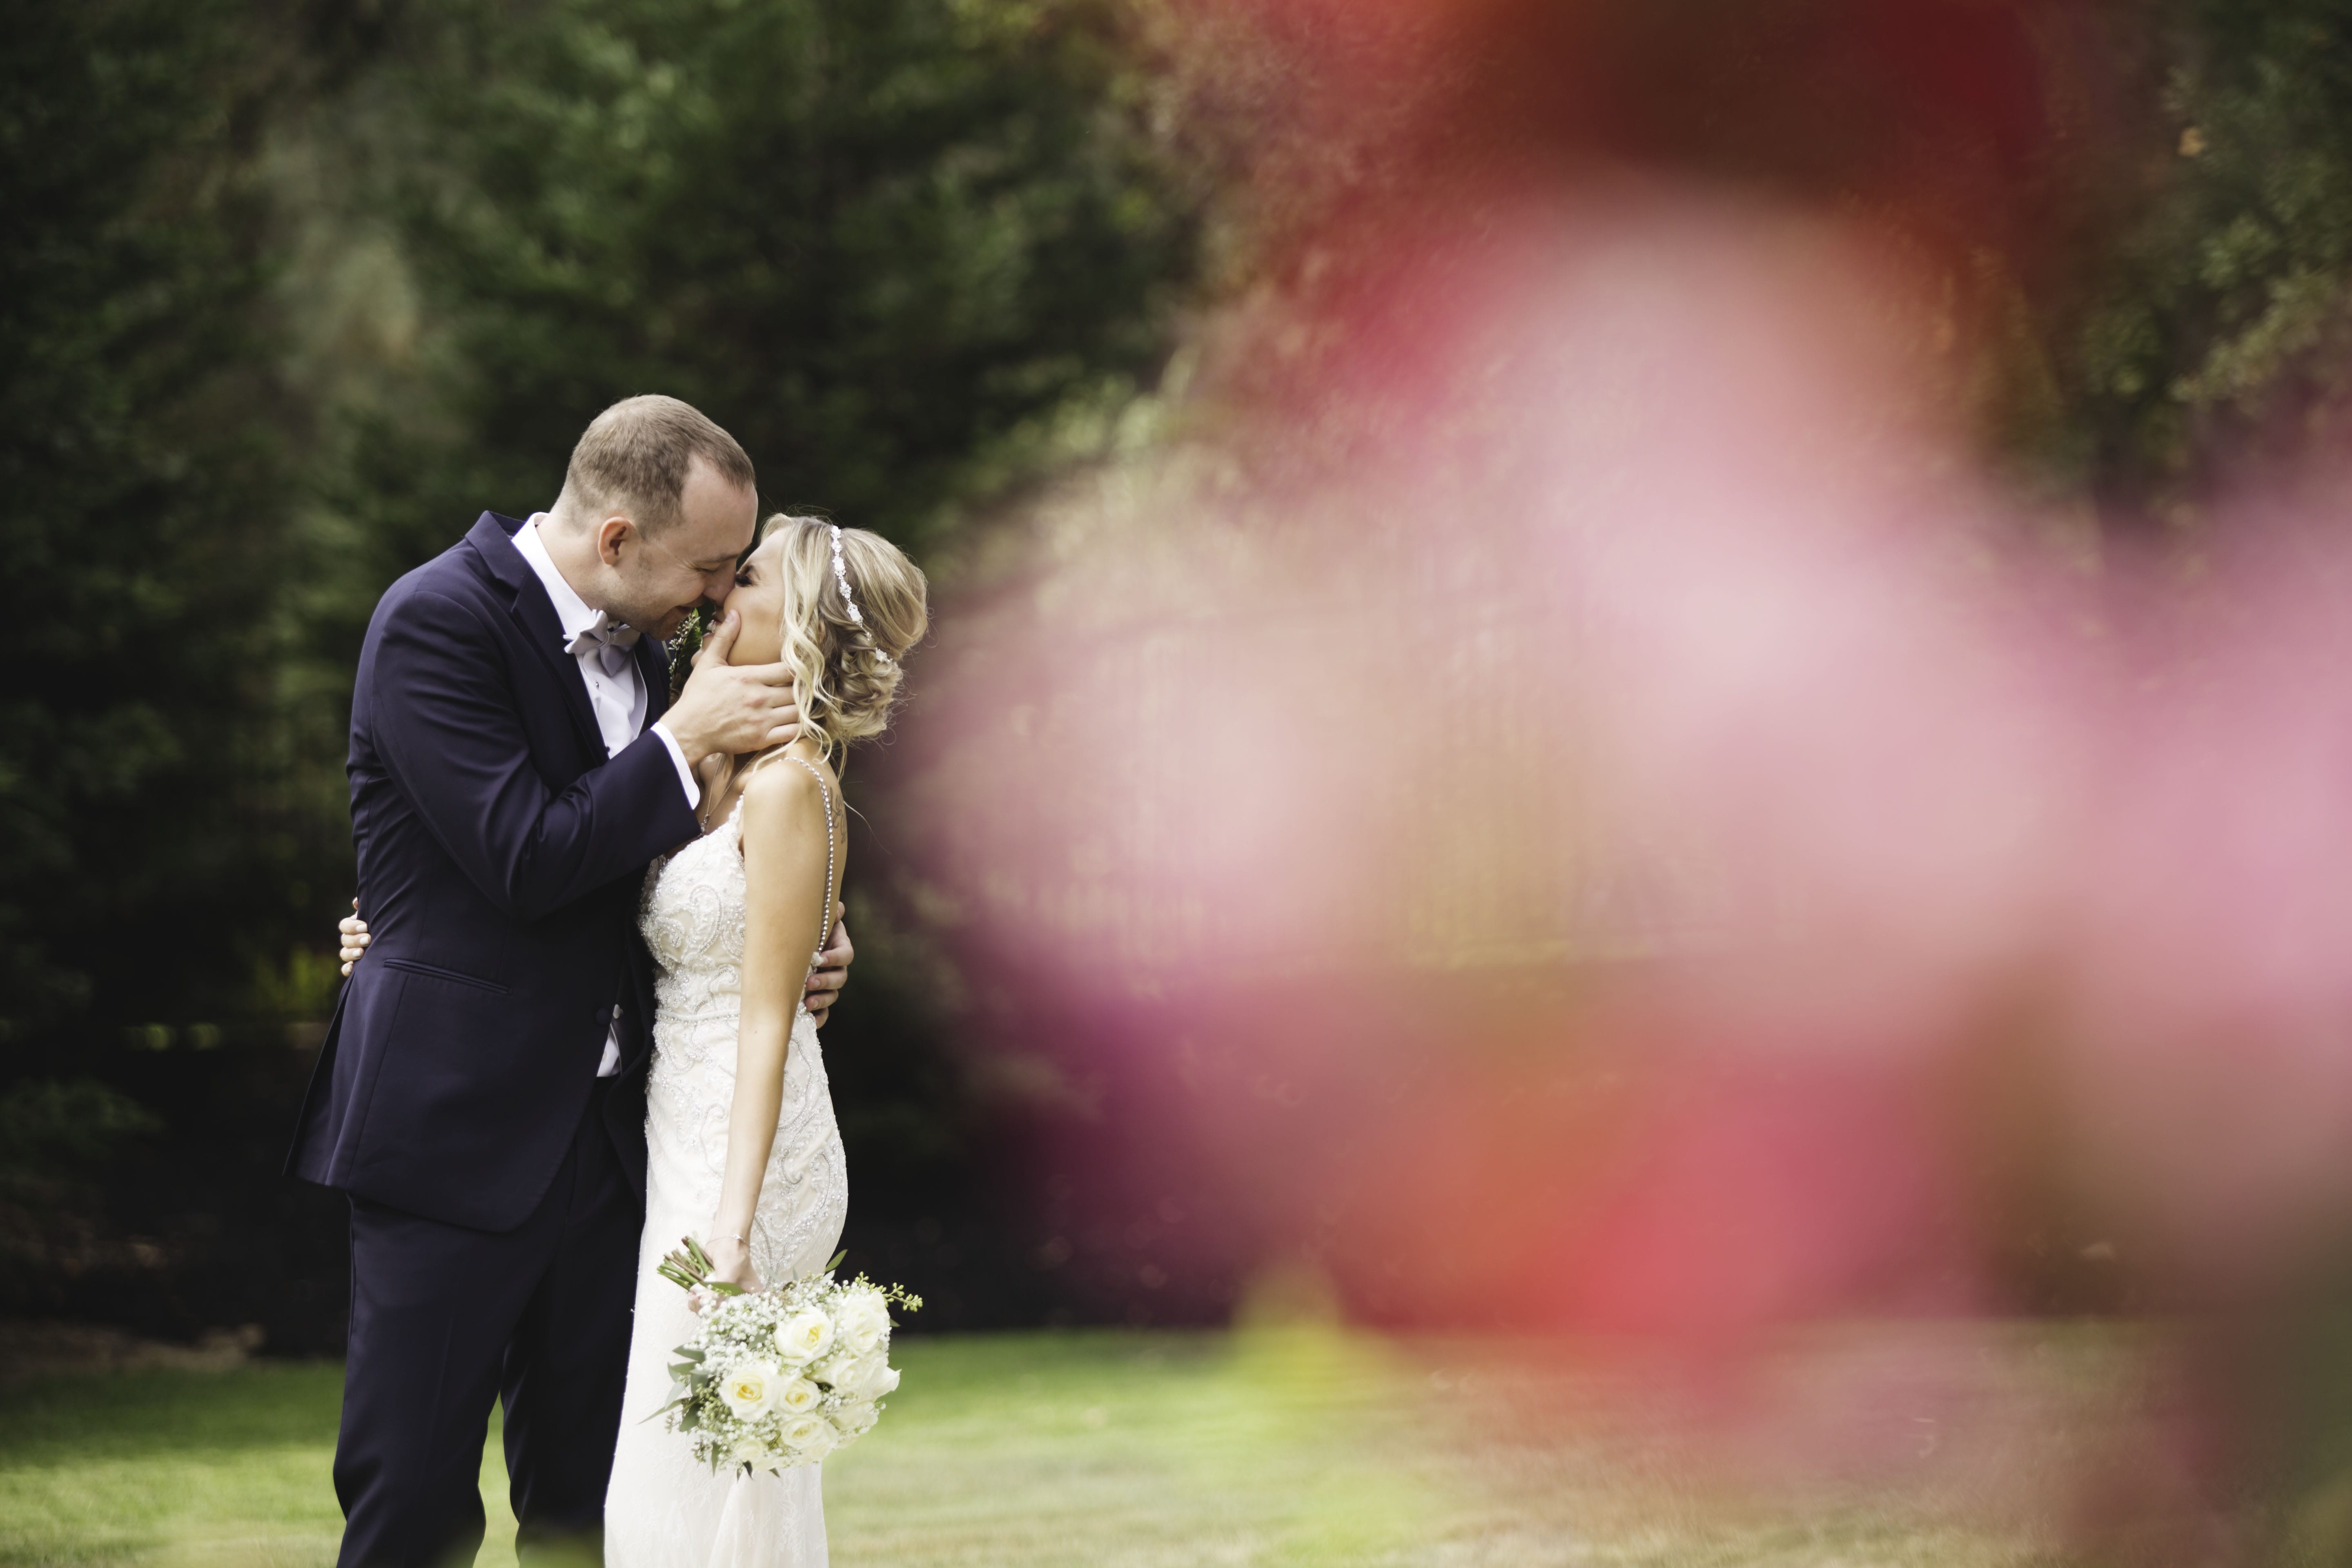 image of a bride and groom on their wedding day kissing with a red flower in the foreground